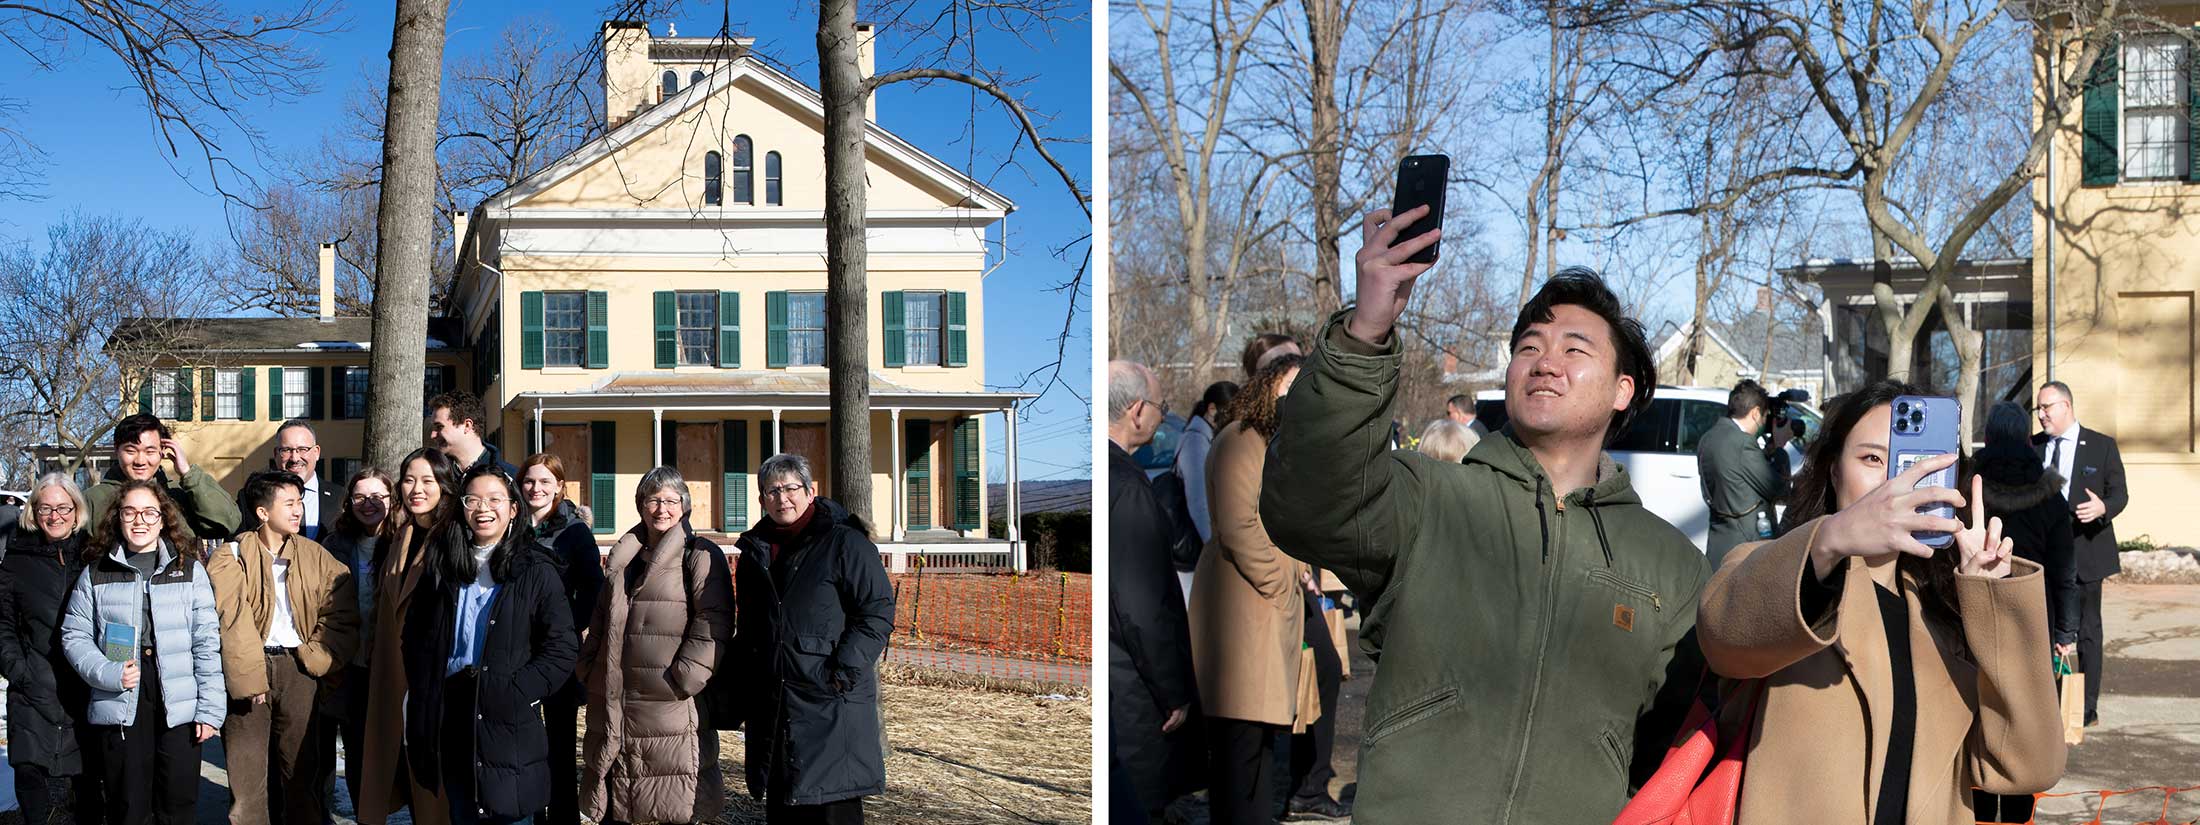 Visitors gather for photos outside of Emily Dickinson's home, The Homestead